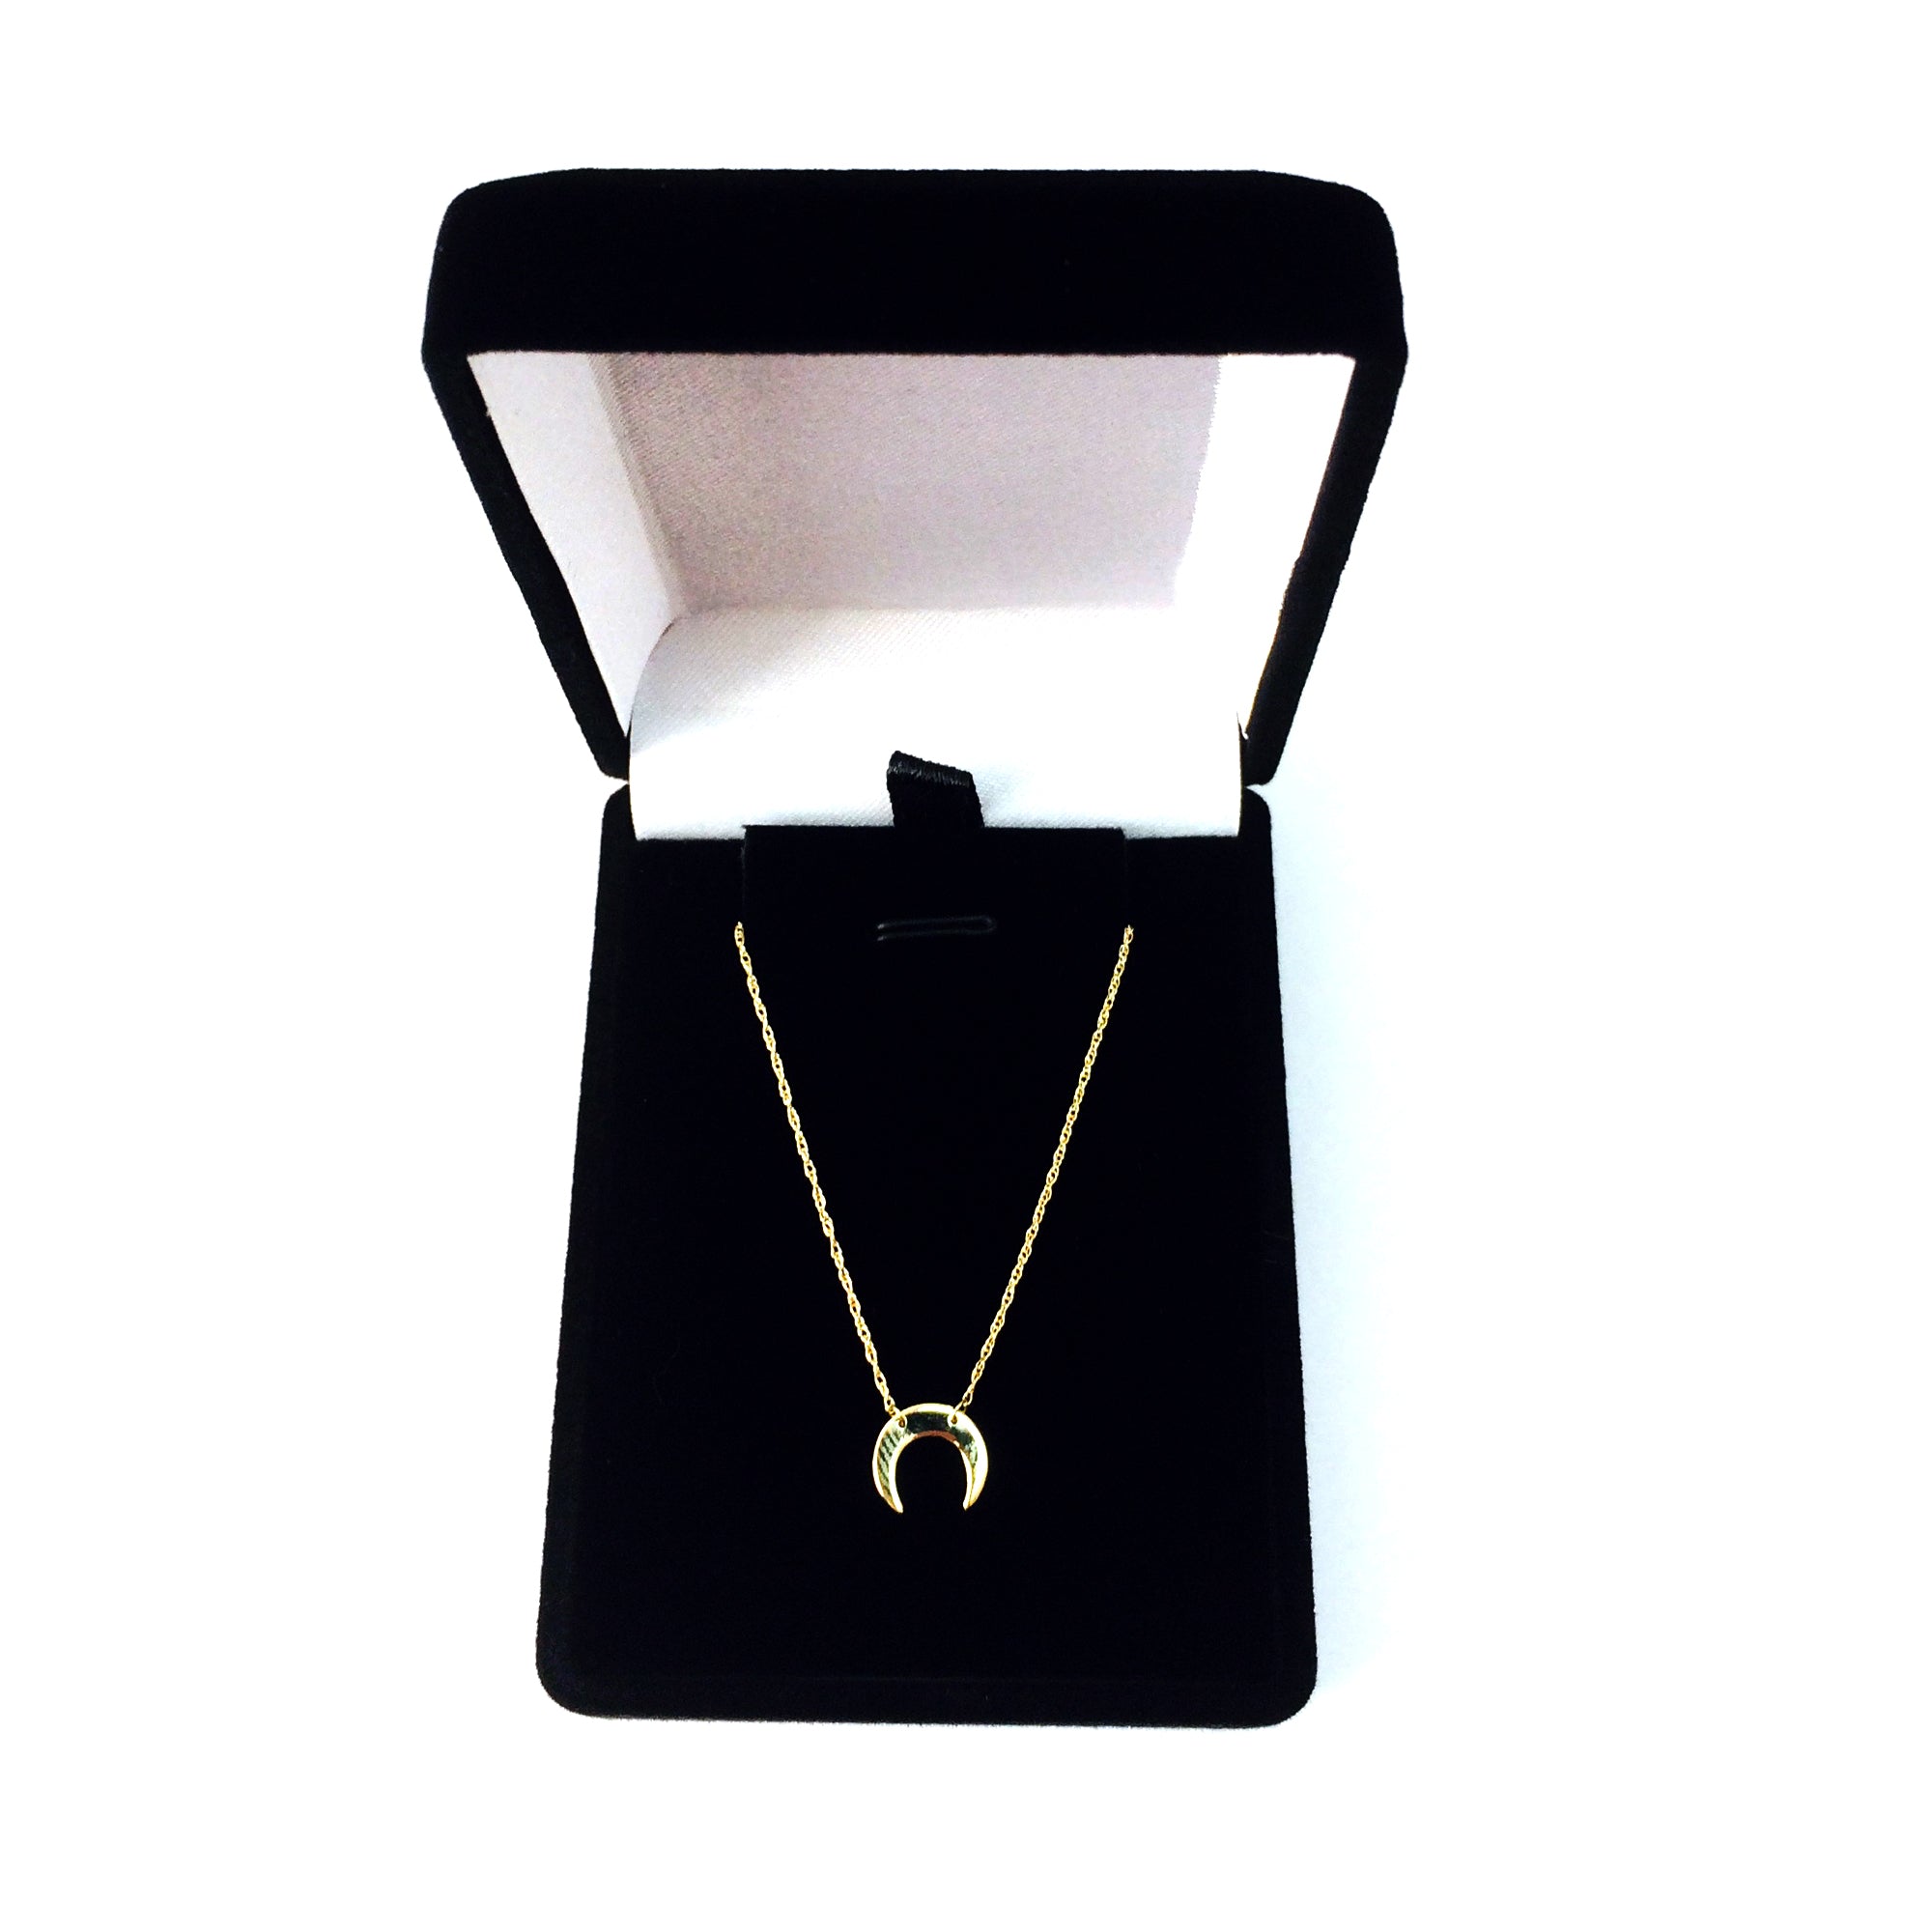 14K Yellow Gold Mini Crescent Moon Pendant Necklace, 16" To 18" Adjustable